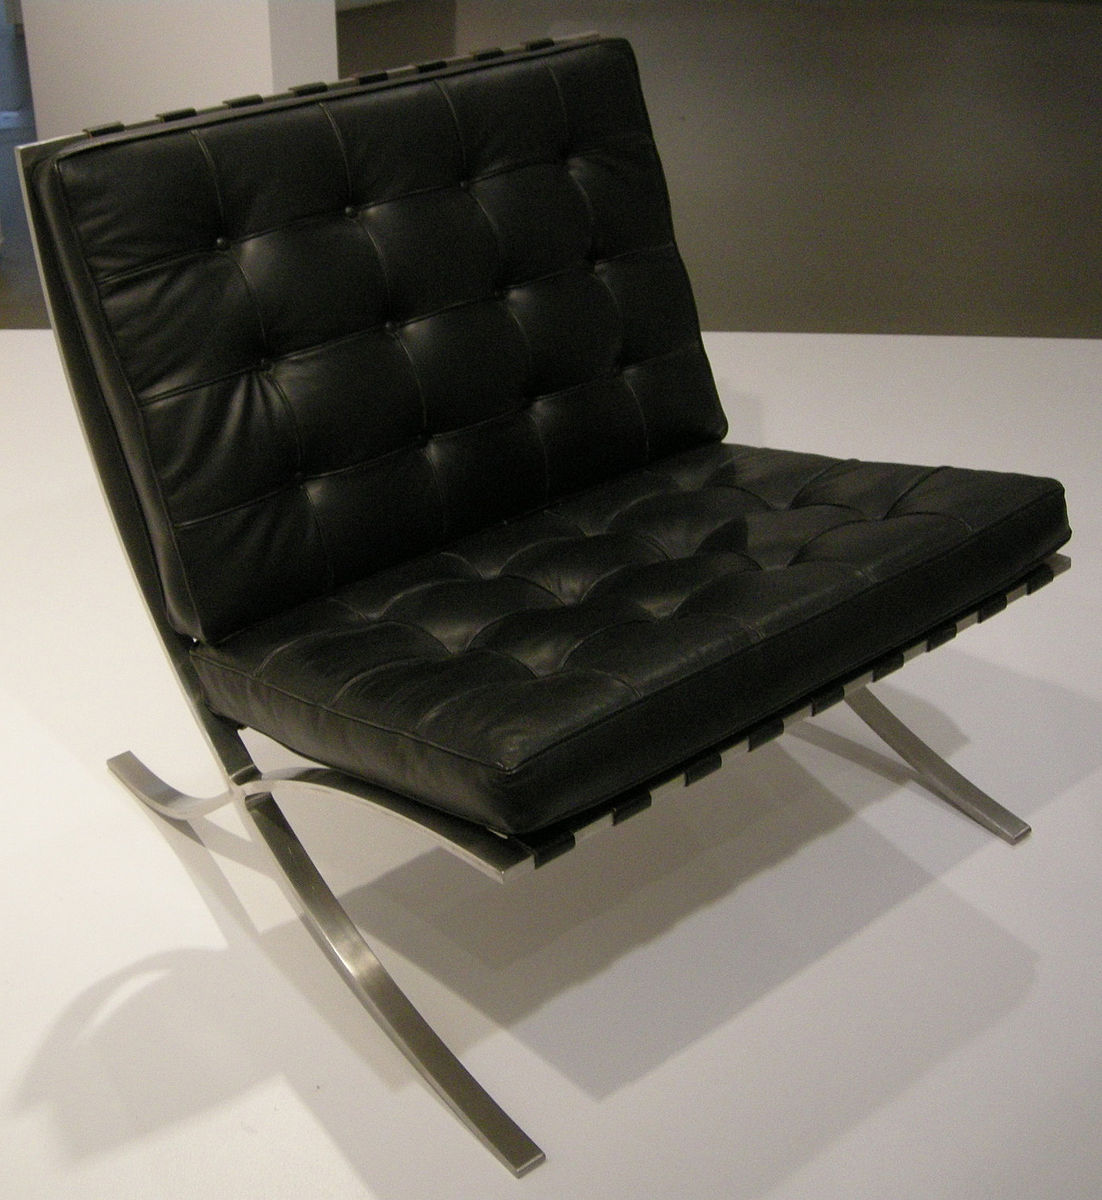 A black leather tufted chair with silver legs